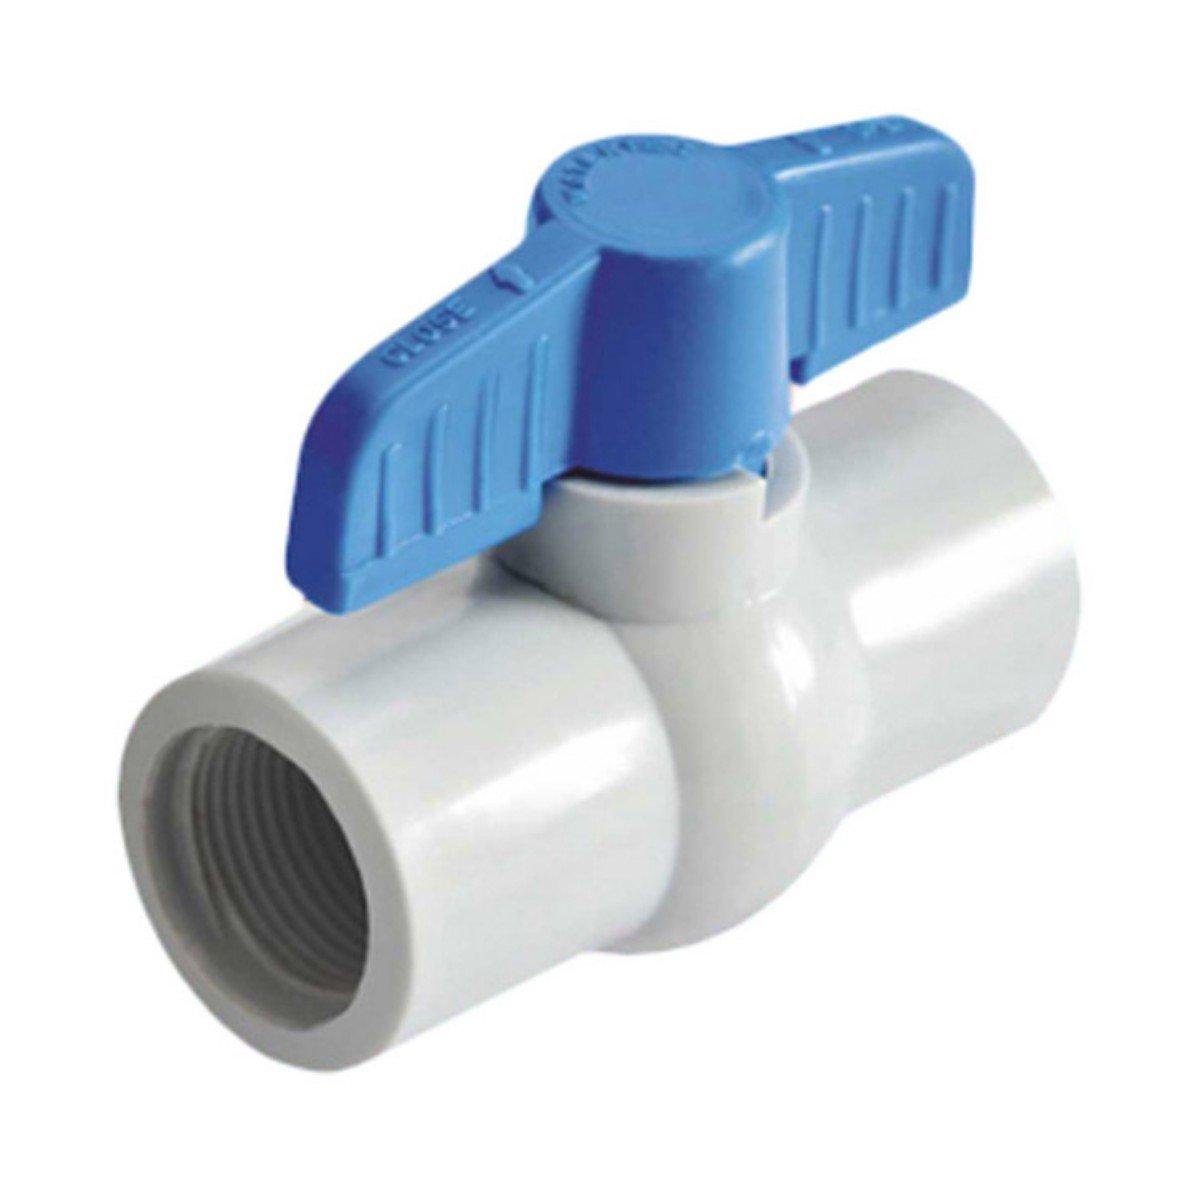 Buy Arvind 1 inch Manual Ball Valves Double Socket online at best rates in India LandT-SuFin